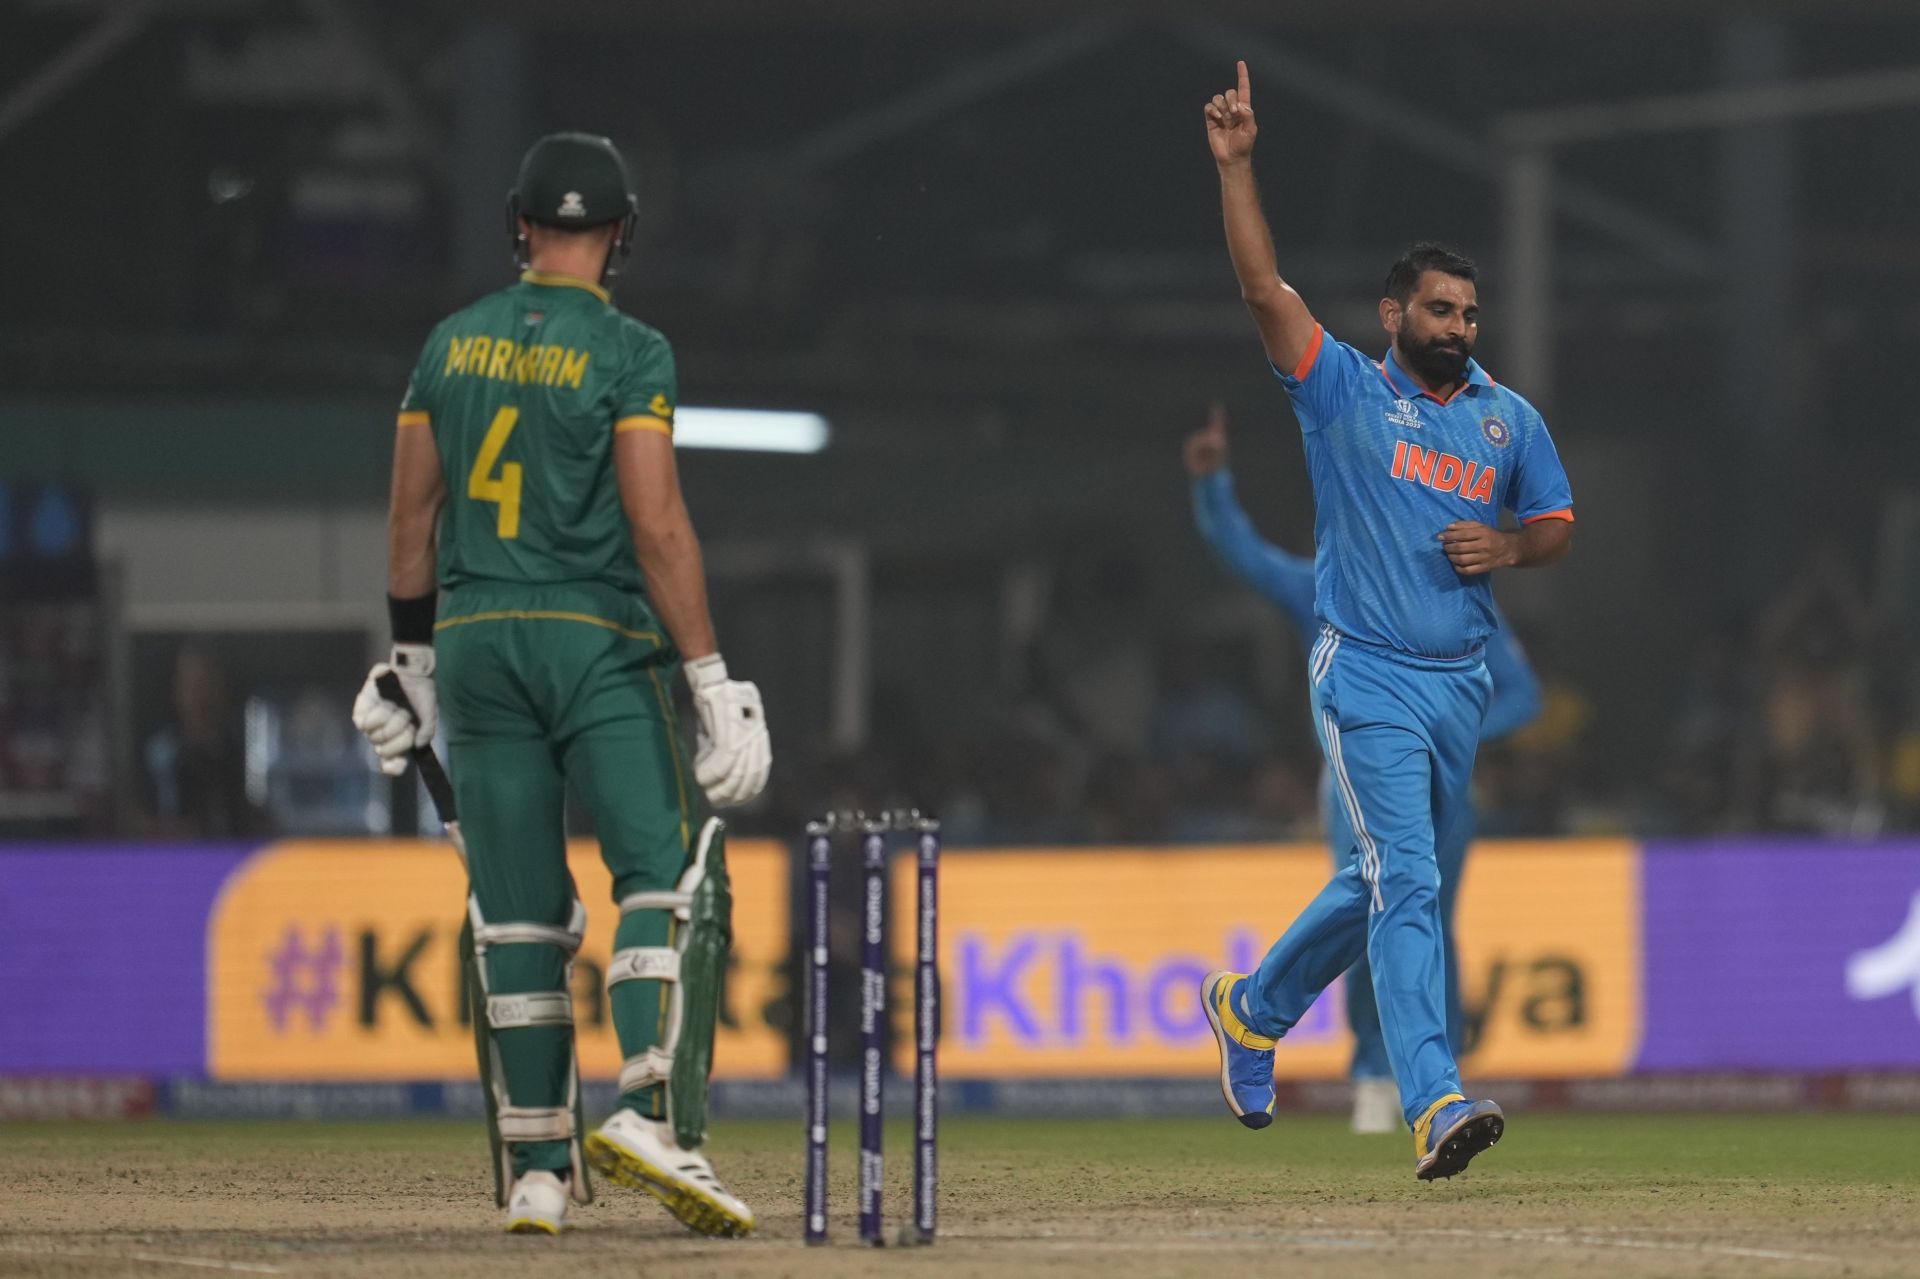 Mohammed Shami registered figures of 2/18 in four overs. [P/C: AP]